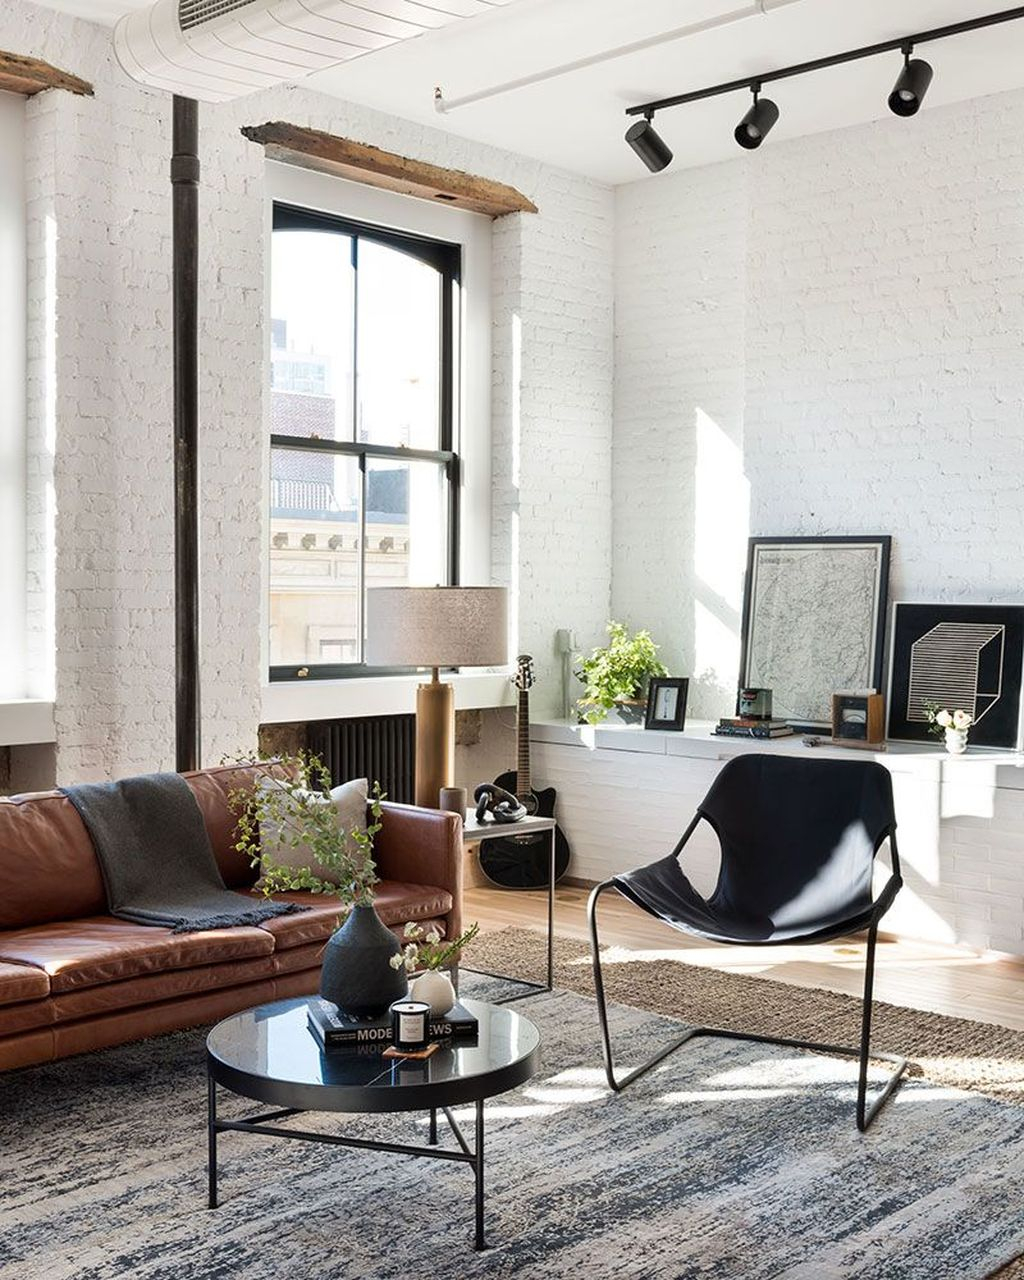 The Best Decorations Industrial Style Living Room That Will Amaze Your Guests06